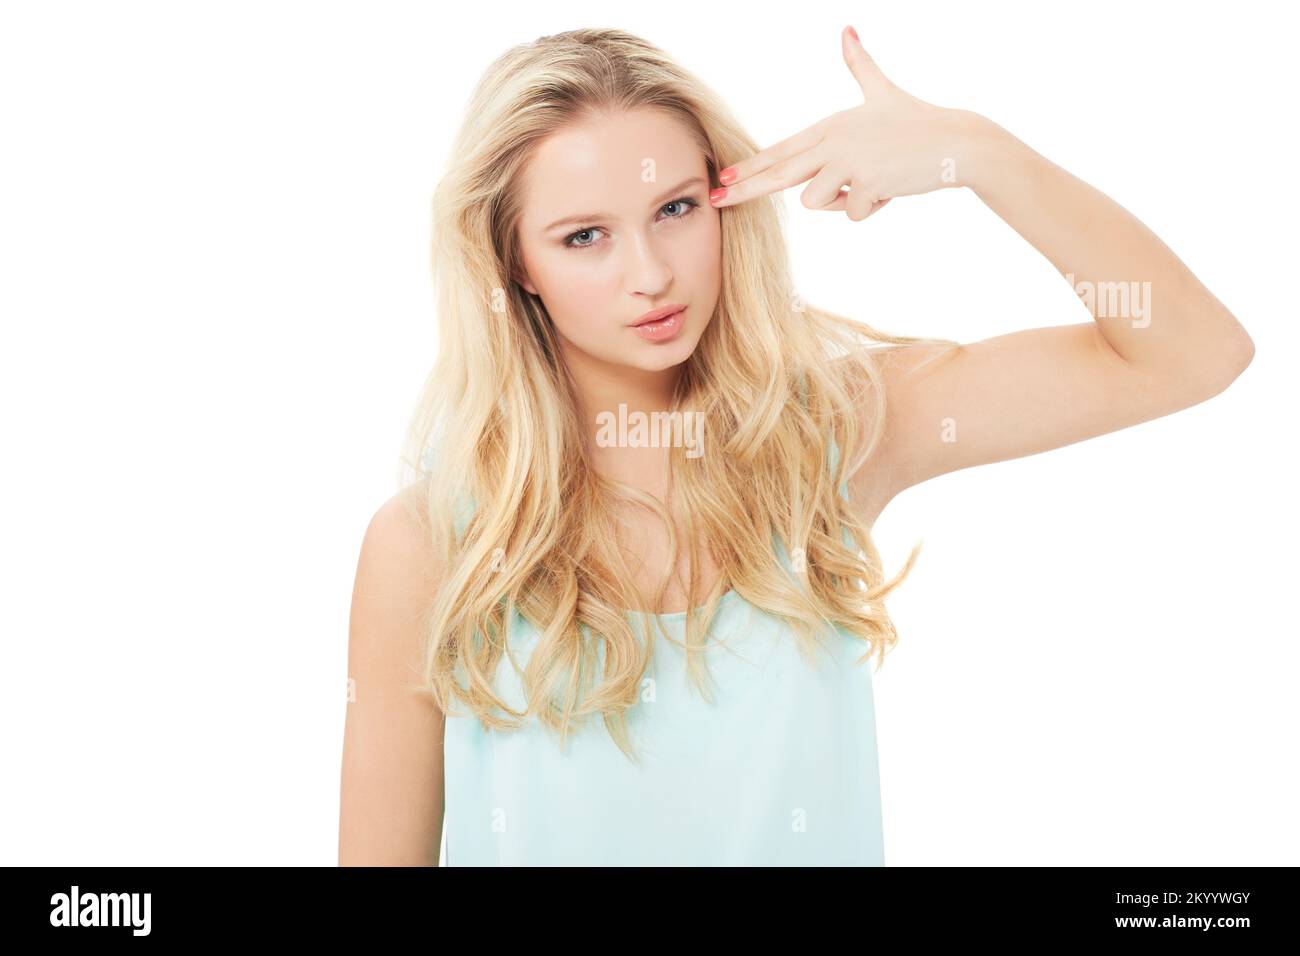 Kill me now, please. A pretty young woman making a gun gesture and aiming her fingers at her head - isolated. Stock Photo